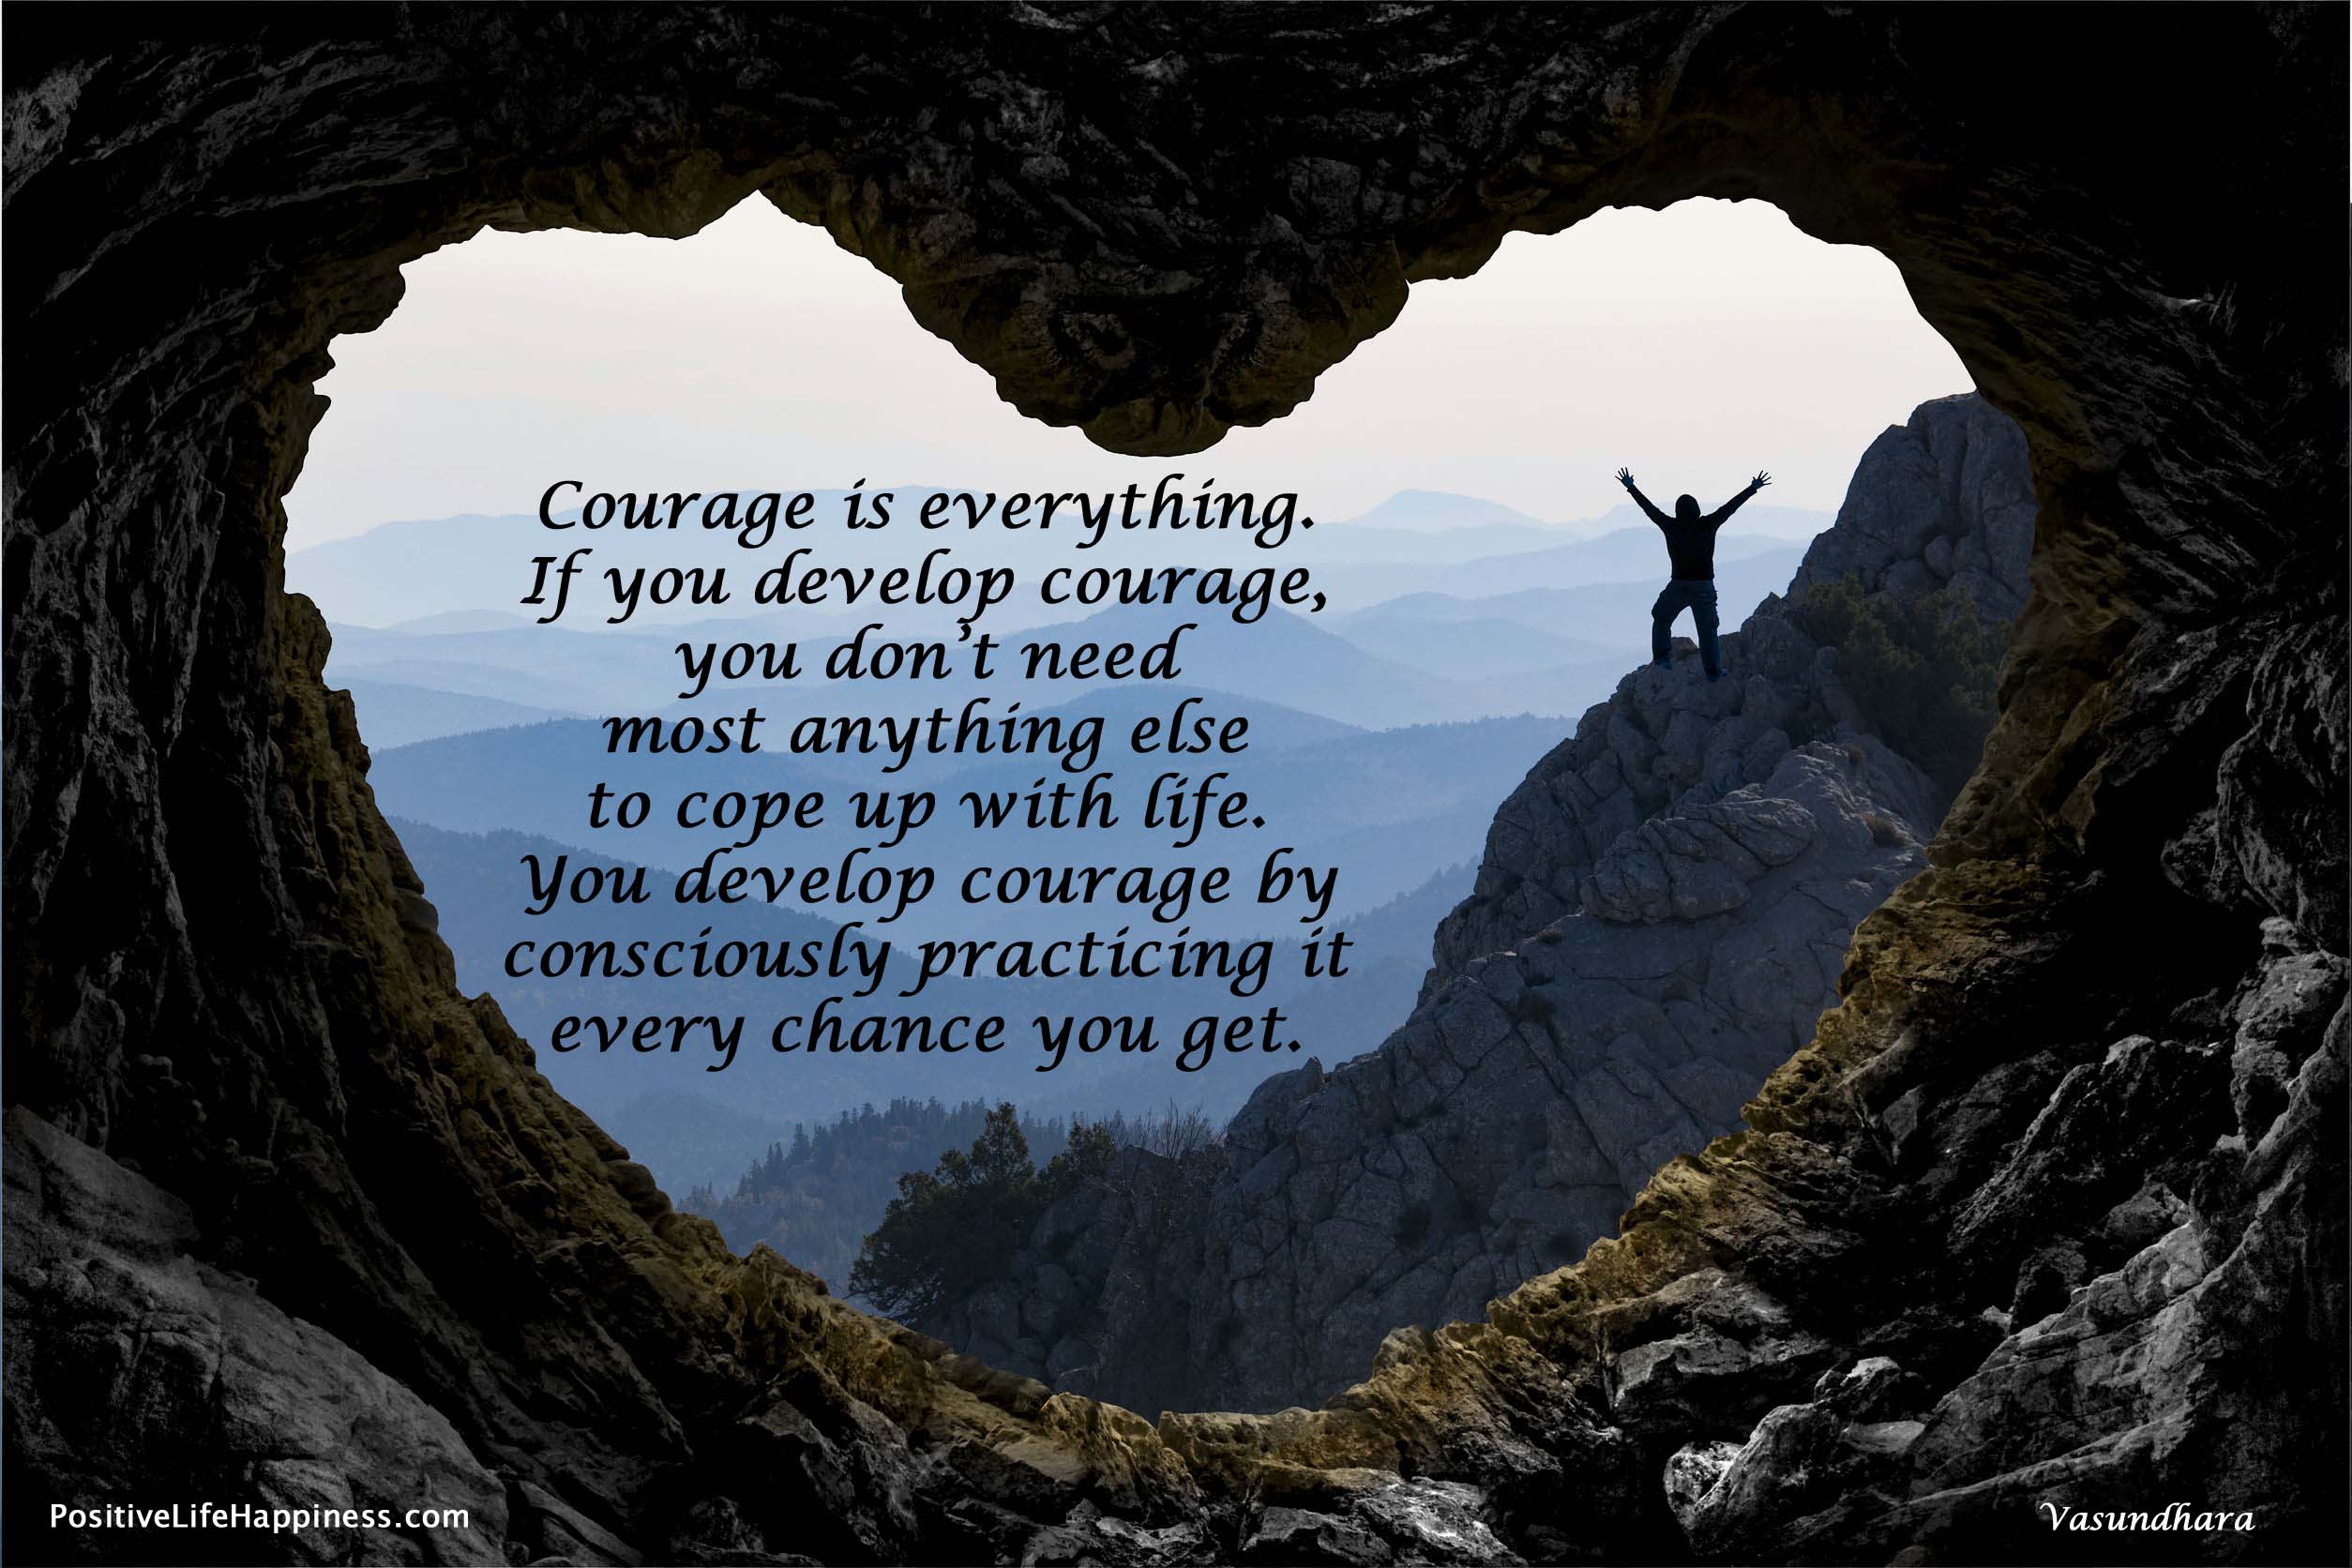 Courage is everything